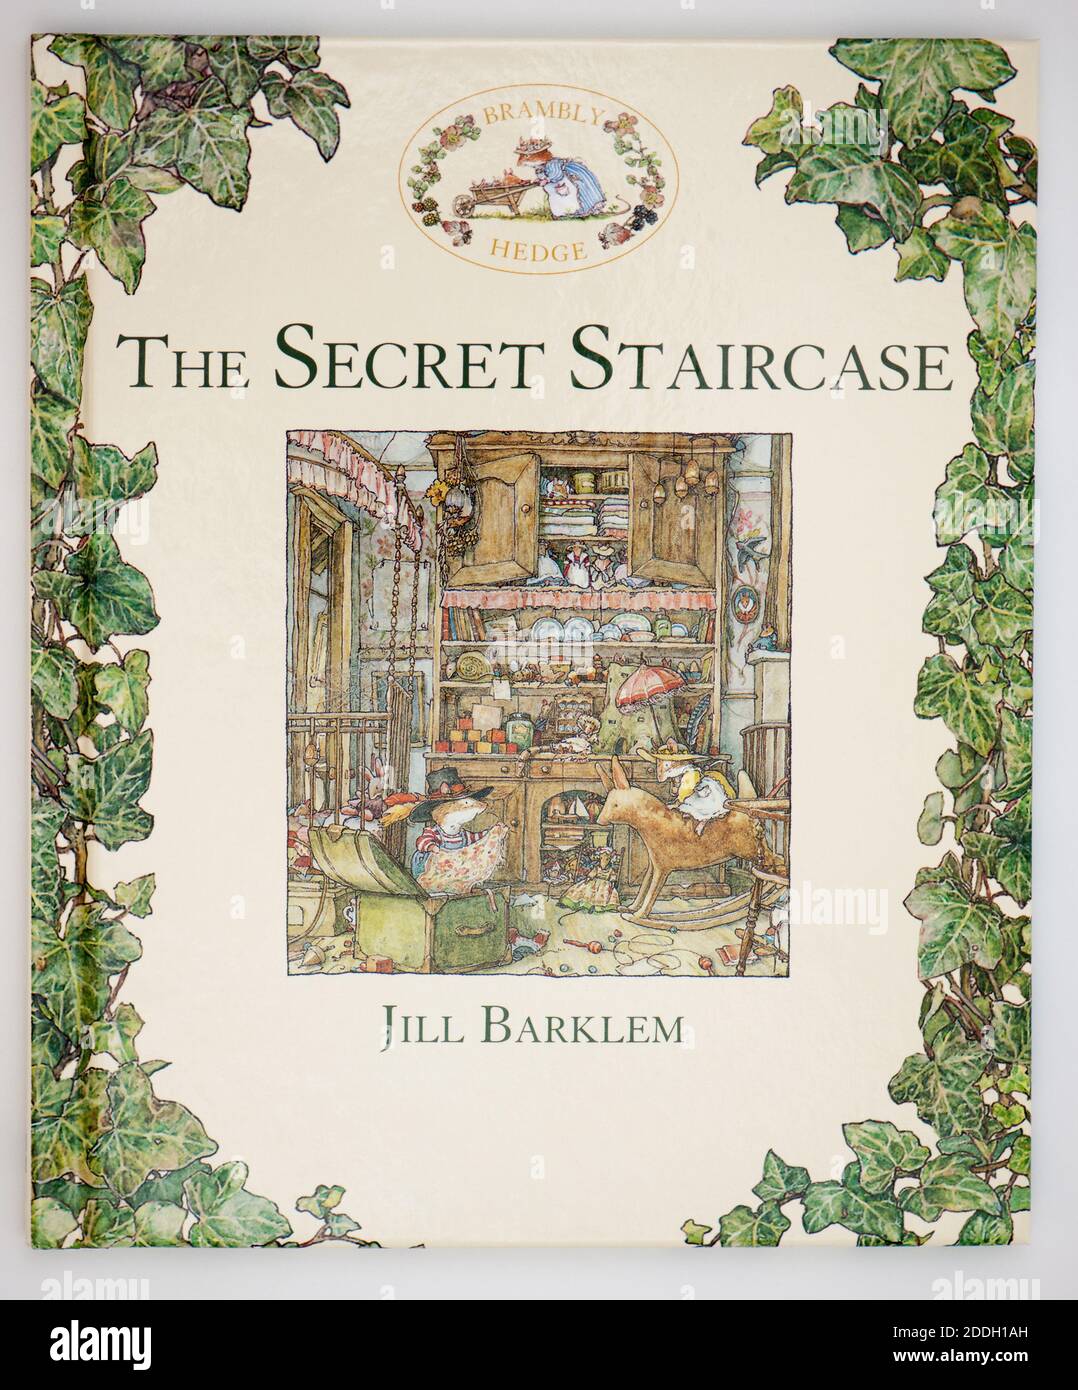 Brambly Hedge - The Secret Staircase - Classic Picture book written and illustrated by Jill Barklem and published in 1983. Stock Photo